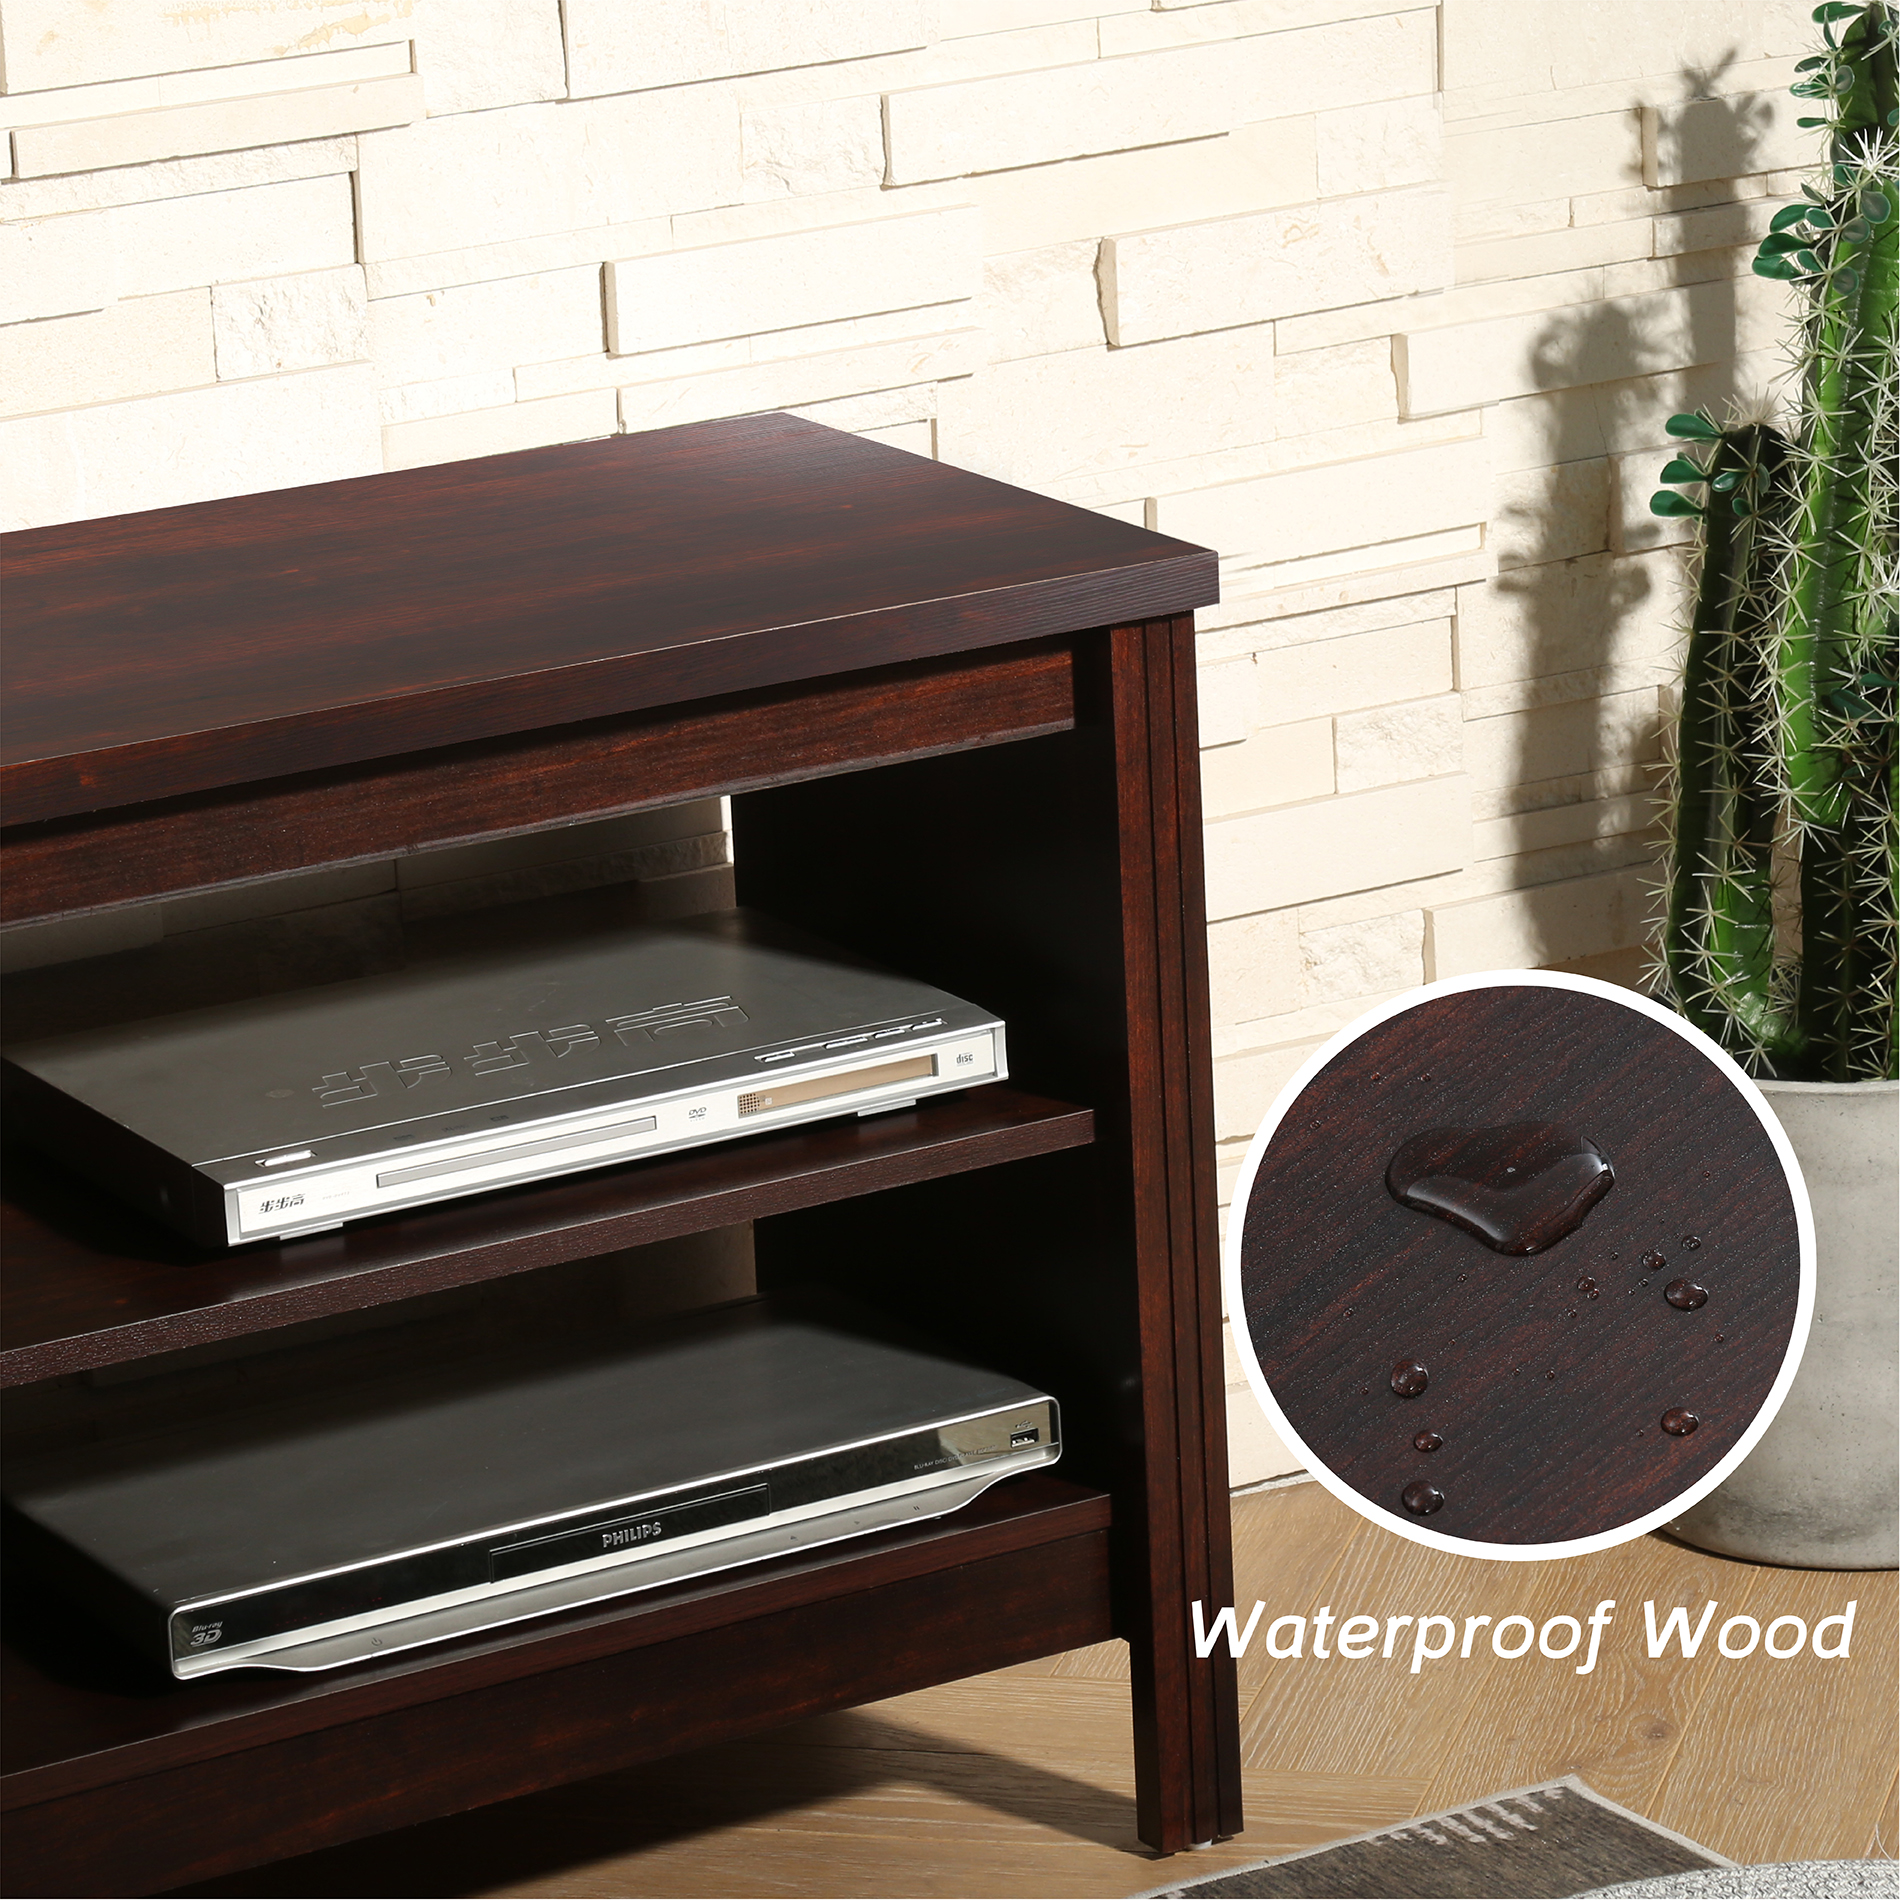 Farmhouse TV Stands for 65 inch Flat Screen,Wood Media Console for bedroom and living room,59 inch,Walnut - image 4 of 5